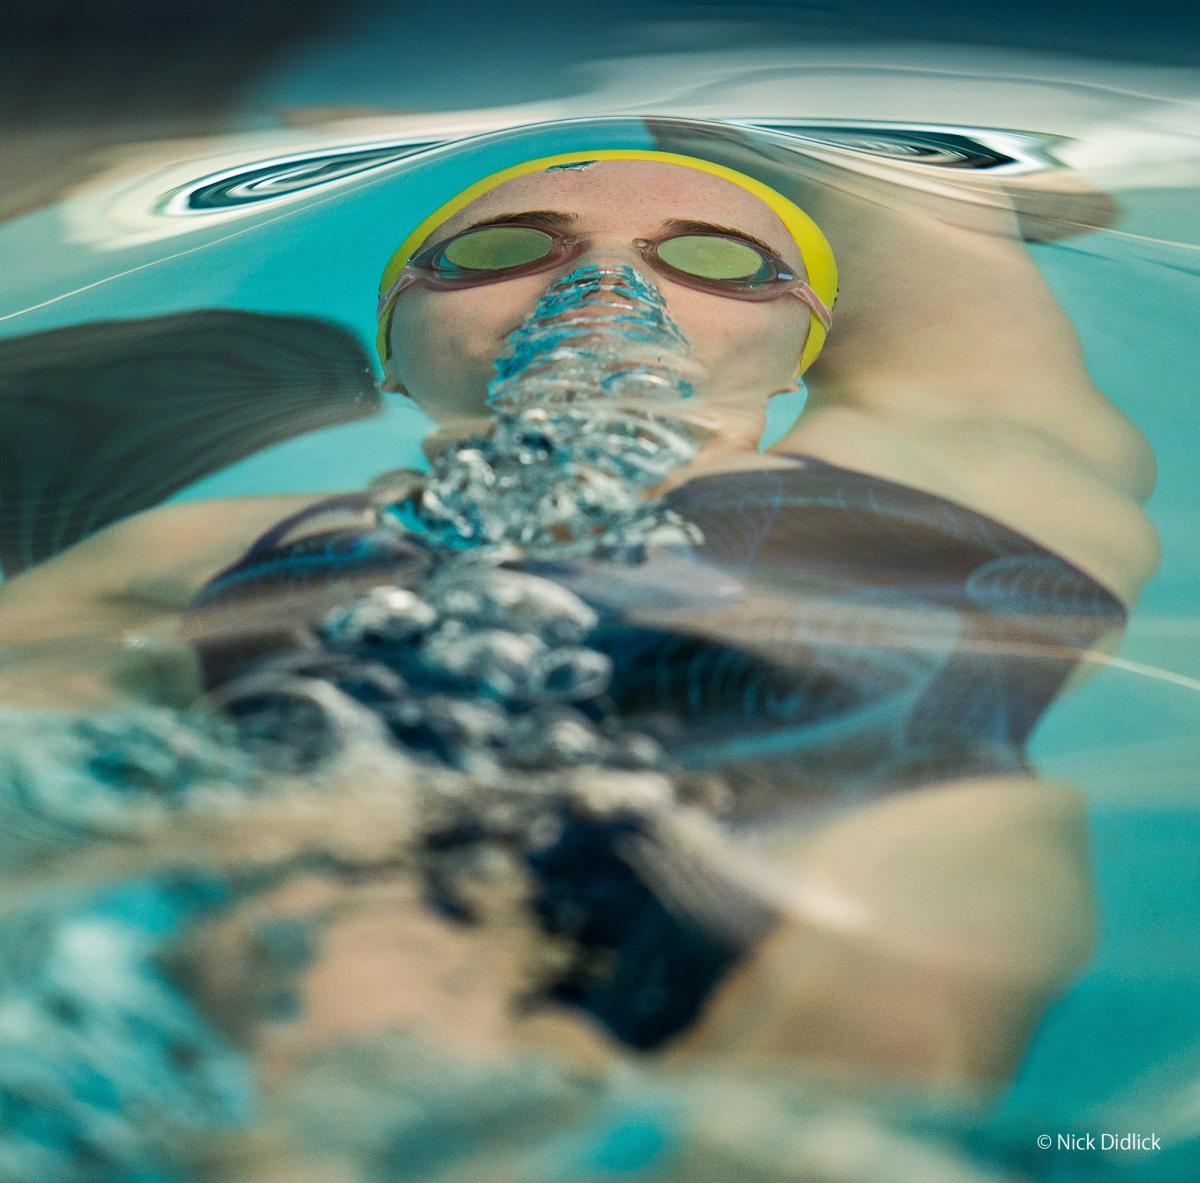 Backstroke swimmer under water with goggles and stream of bubbles from nose